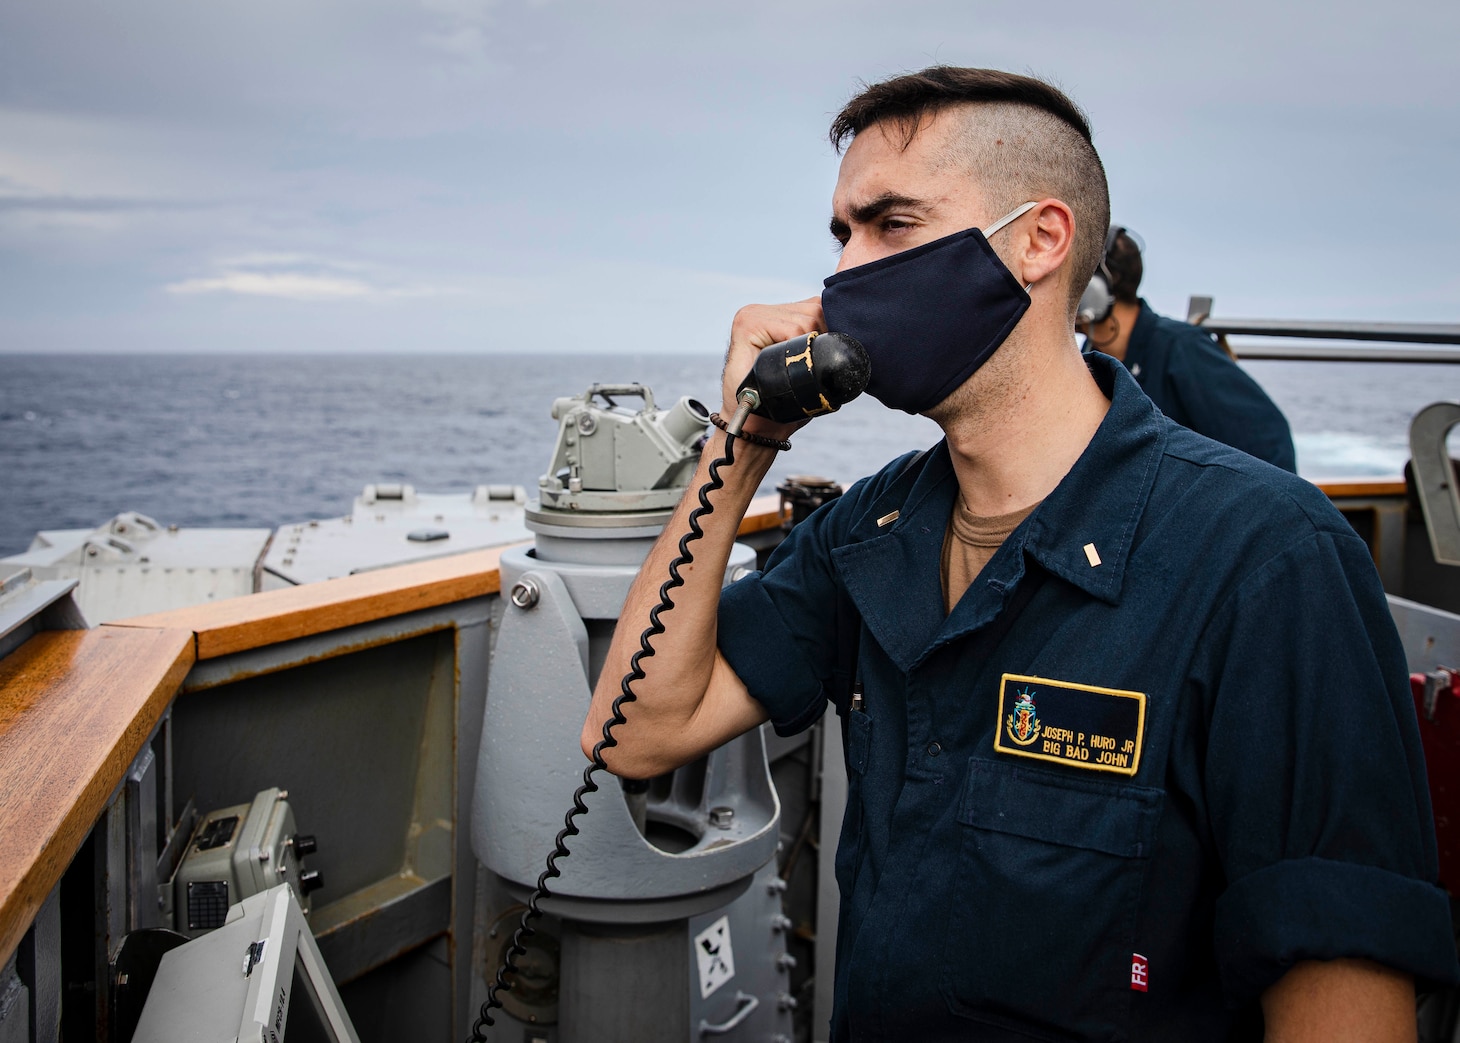 SOUTH CHINA SEA (Dec. 22, 2020) Conning Officer Ensign Joseph Hurd, from Foley, Alabama, gives course and speed orders to the helm while standing watch on the bridge wing as the guided-missile destroyer USS John S. McCain (DDG 56) conducts routine underway operations. McCain is forward-deployed to the U.S. 7th Fleet area of operations in support of security and stability in the Indo-Pacific region. (U.S. Navy photo by Mass Communication Specialist 2nd Class Markus Castaneda)